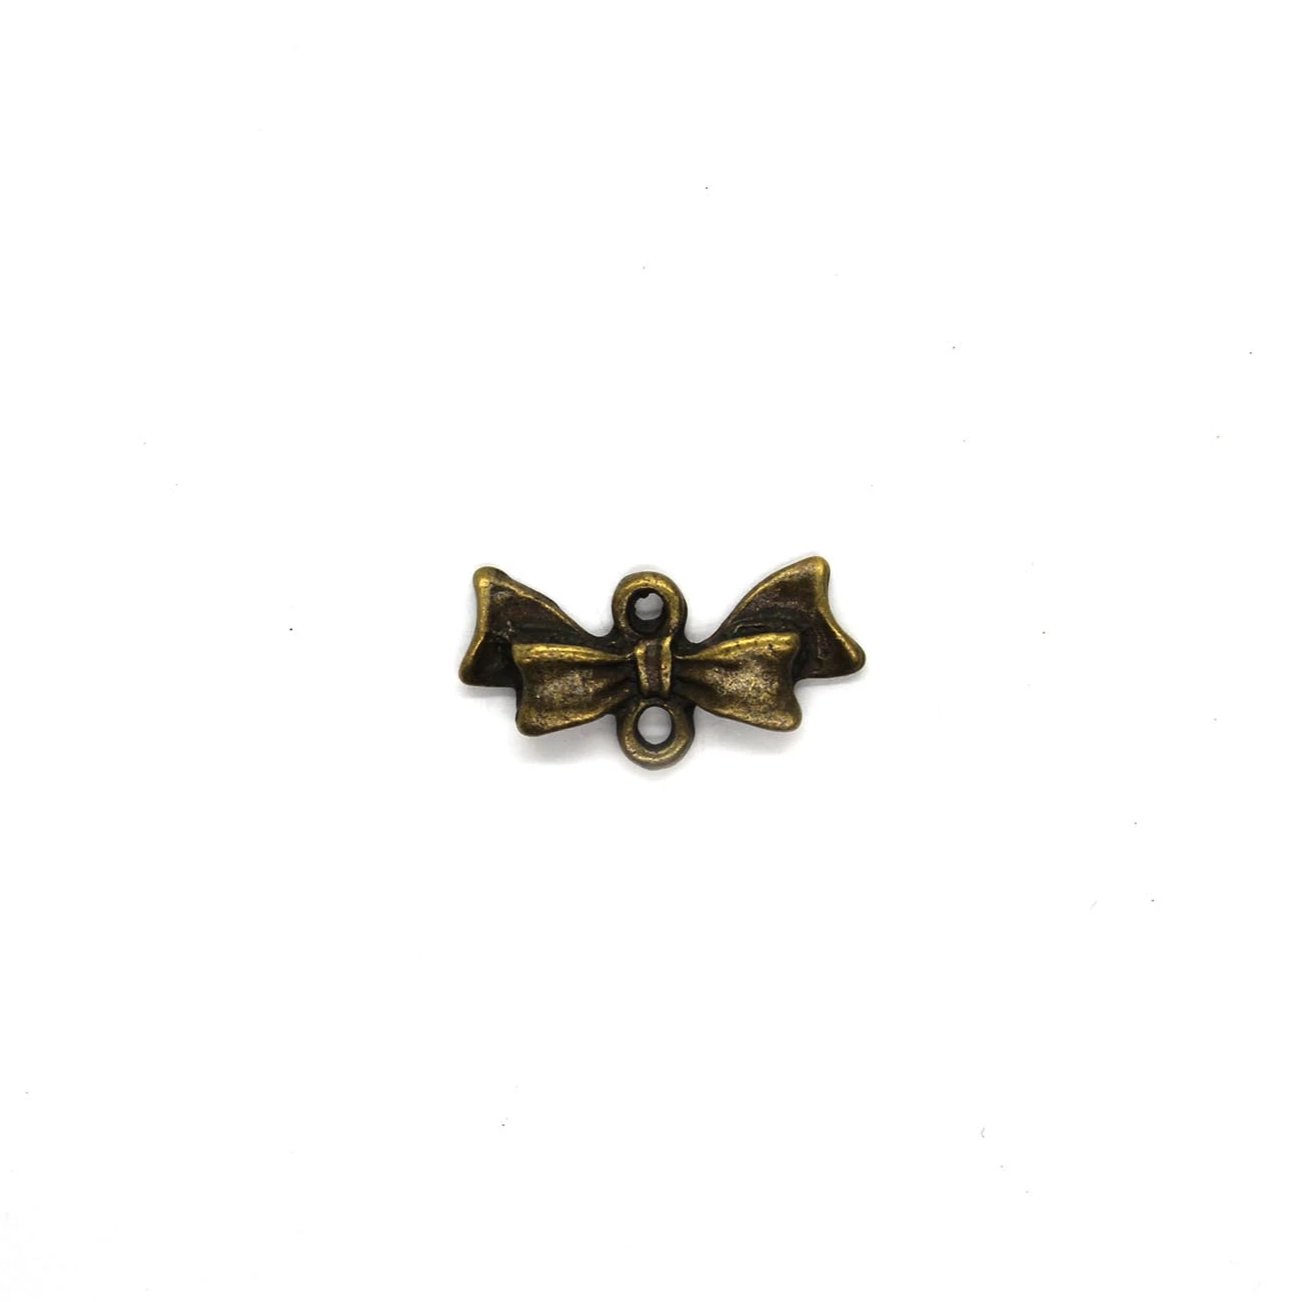 Connector, Bow, Brass, Alloy, 20mm x 10mm x 2mm, Sold Per pkg of 10